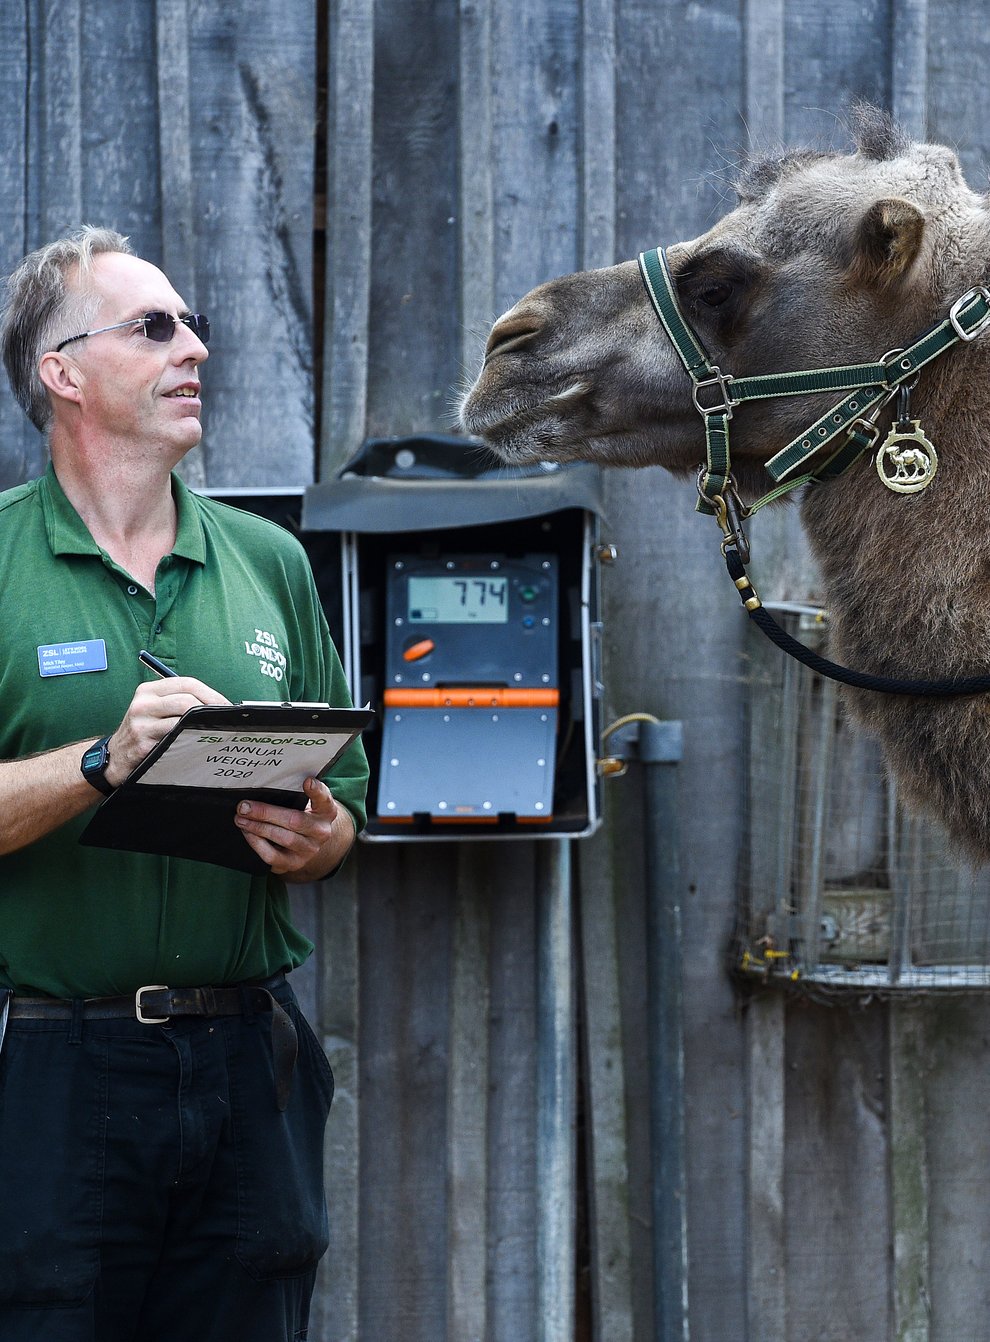 Keeper Mick Tiley weighs Noemie the bactrian camel, during the annual weigh-in at ZSL London Zoo